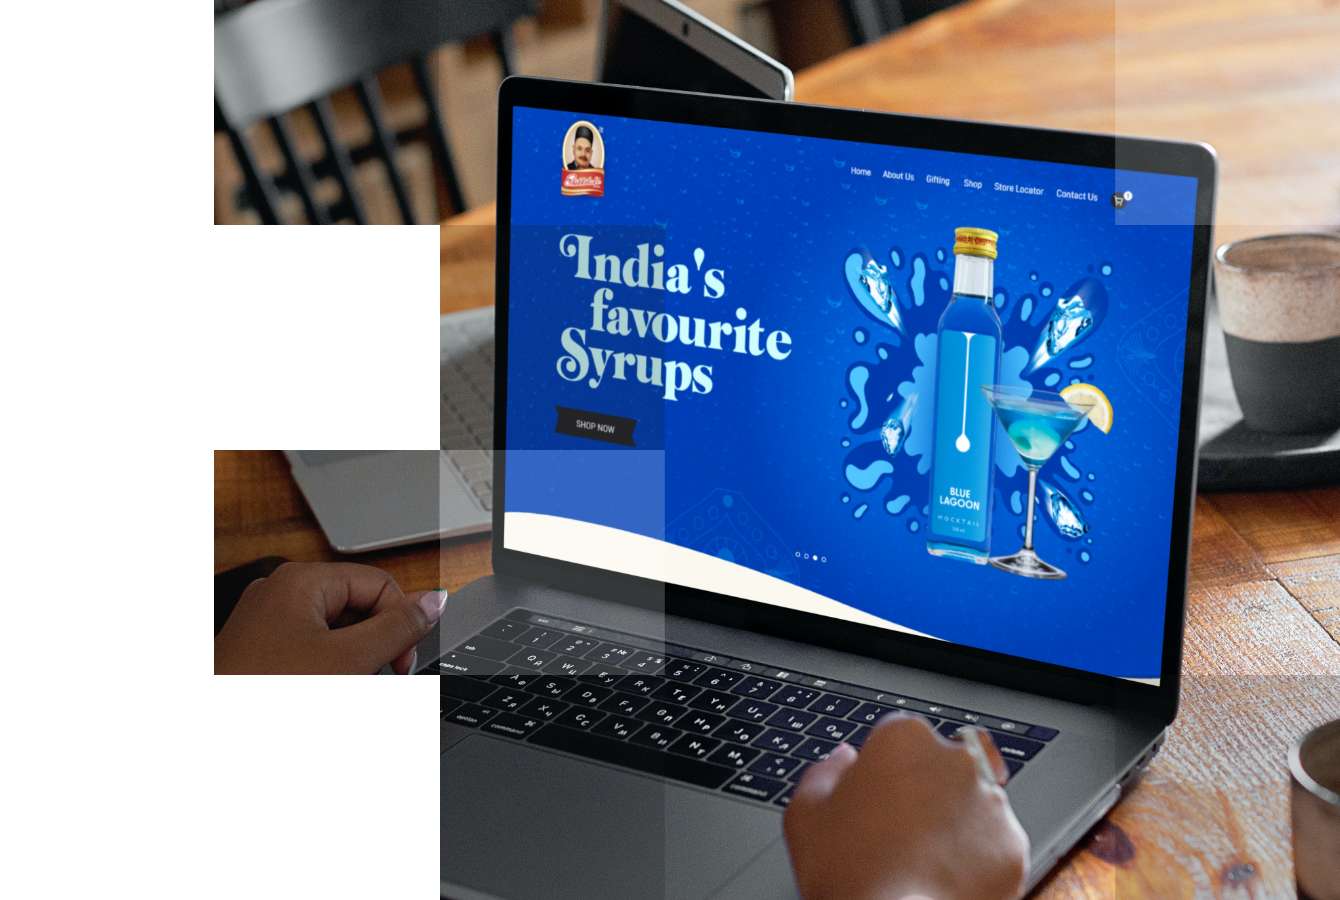 A silver laptop computer displaying a website with the text "India's favourite Syrups. Shop Now Lagoona" on the screen. A bottle of syrup is on top of the laptop screen, obscuring part of the text. The laptop is on a wooden table.